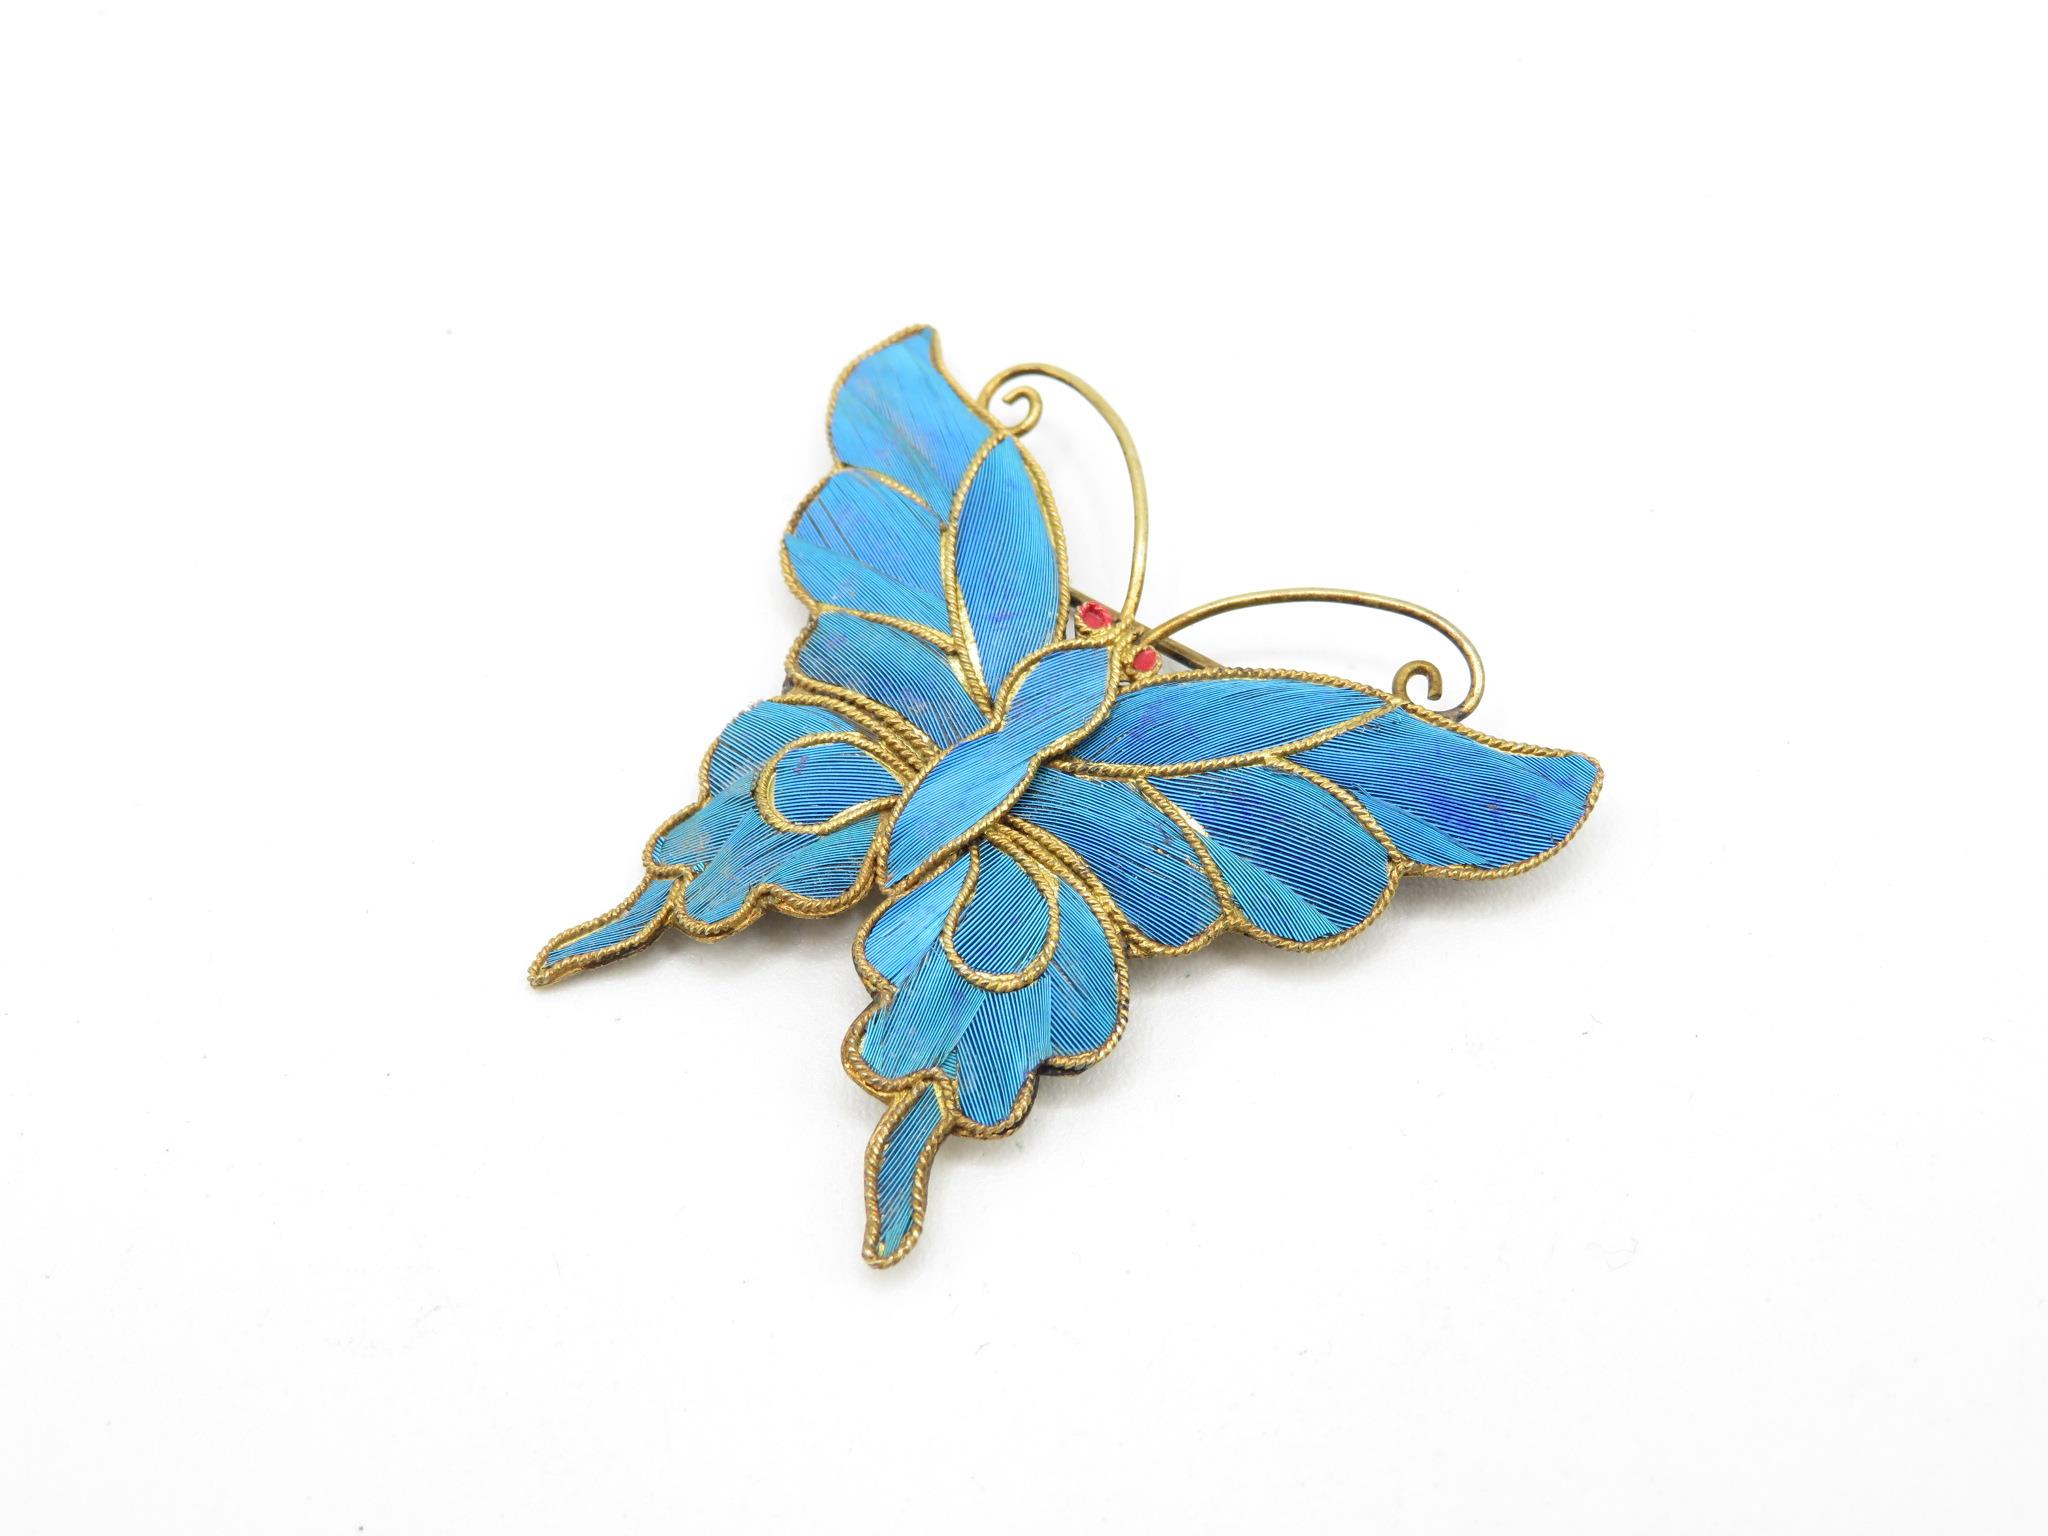 A Tian-Tsui Kingfisher Feather Butterfly Brooch - Image 2 of 4